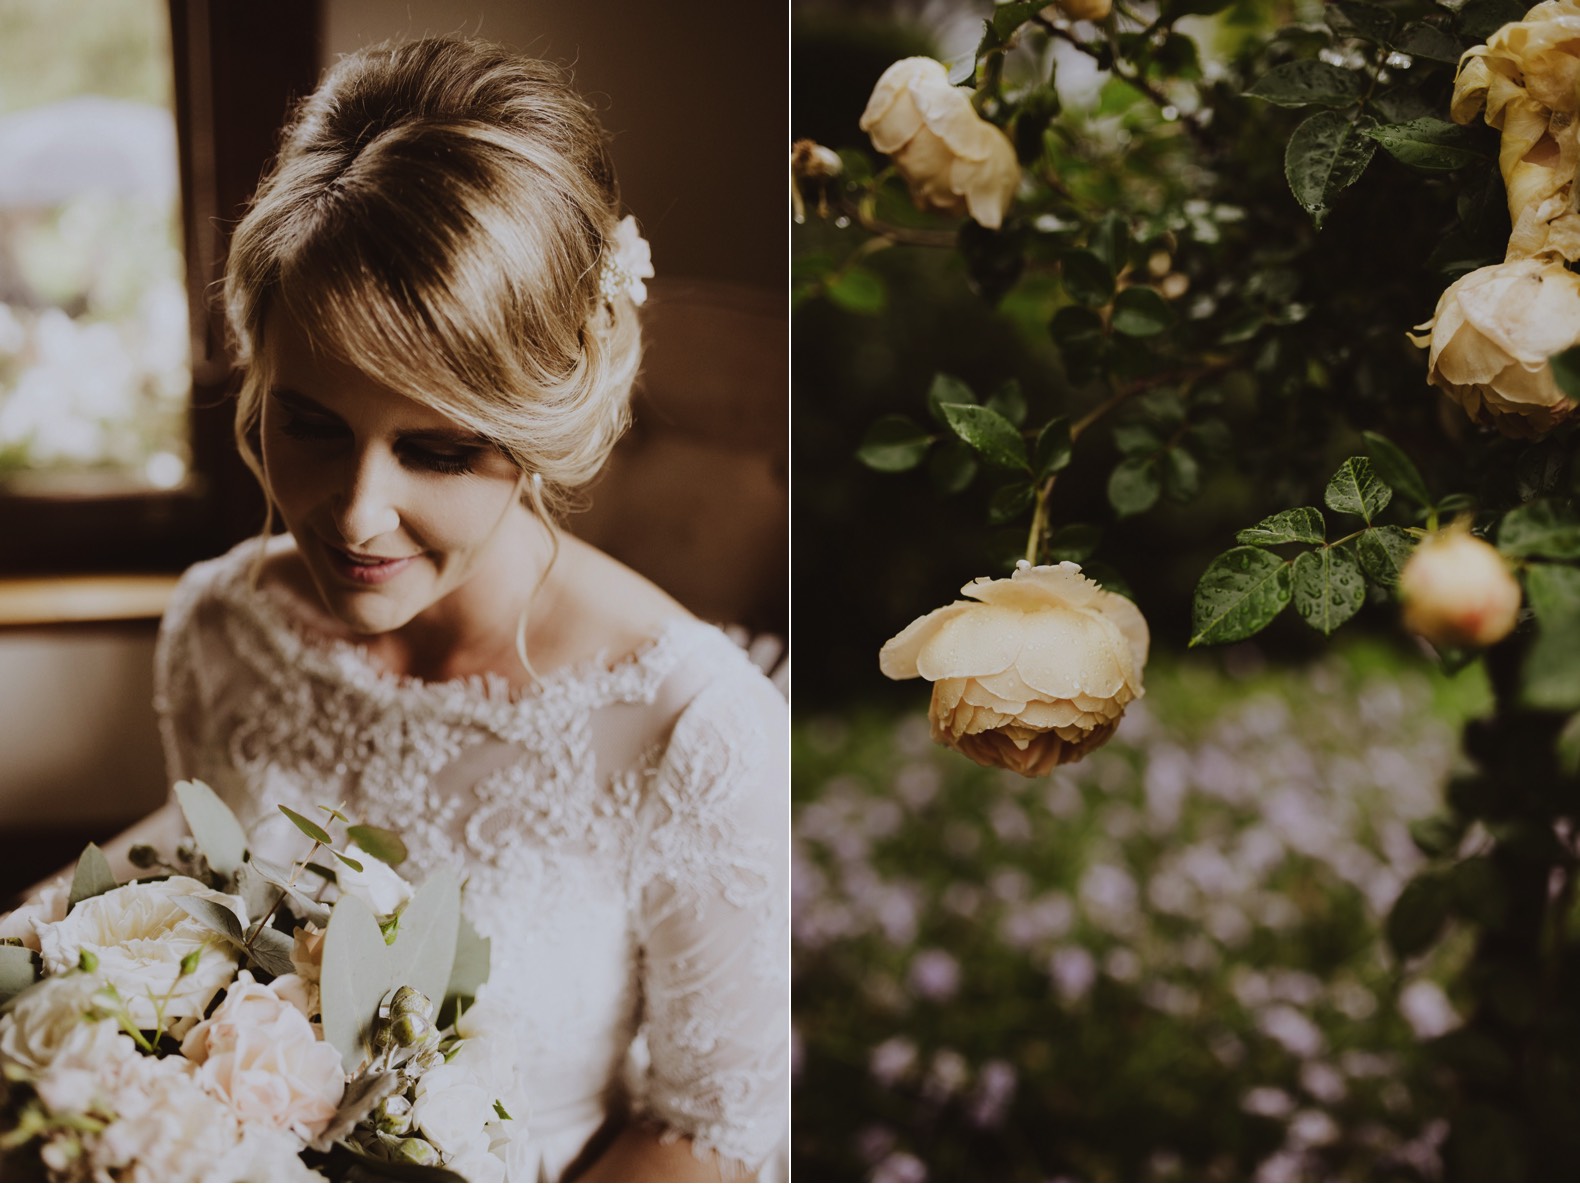 bride portrait in nice window light and yellow roses with rain drops 